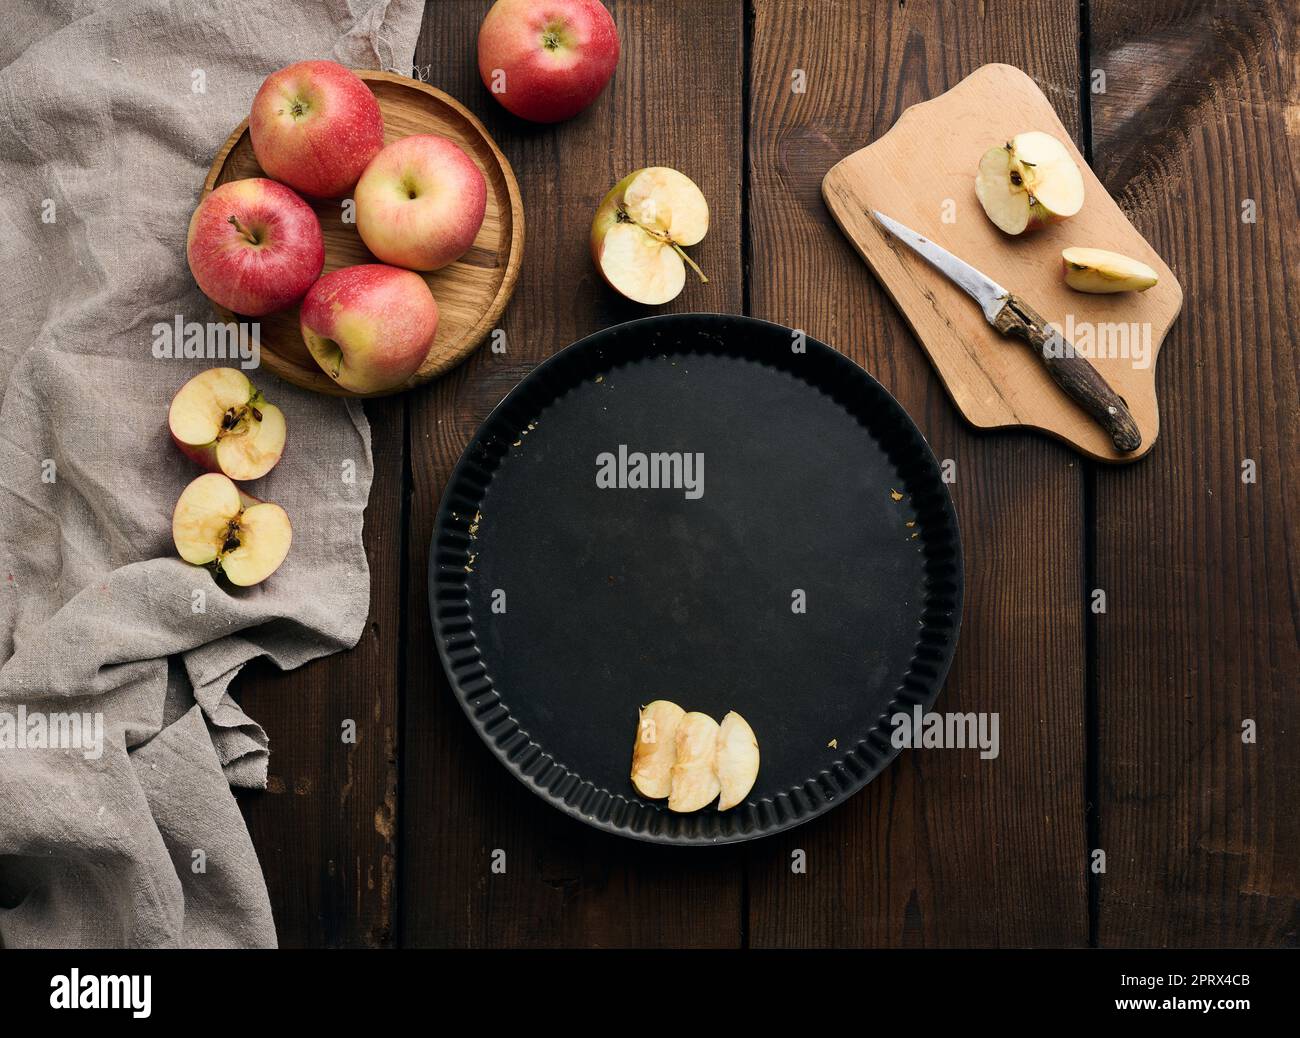 Empty round non-stick baking sheet, fresh apples on a wooden brown table Stock Photo